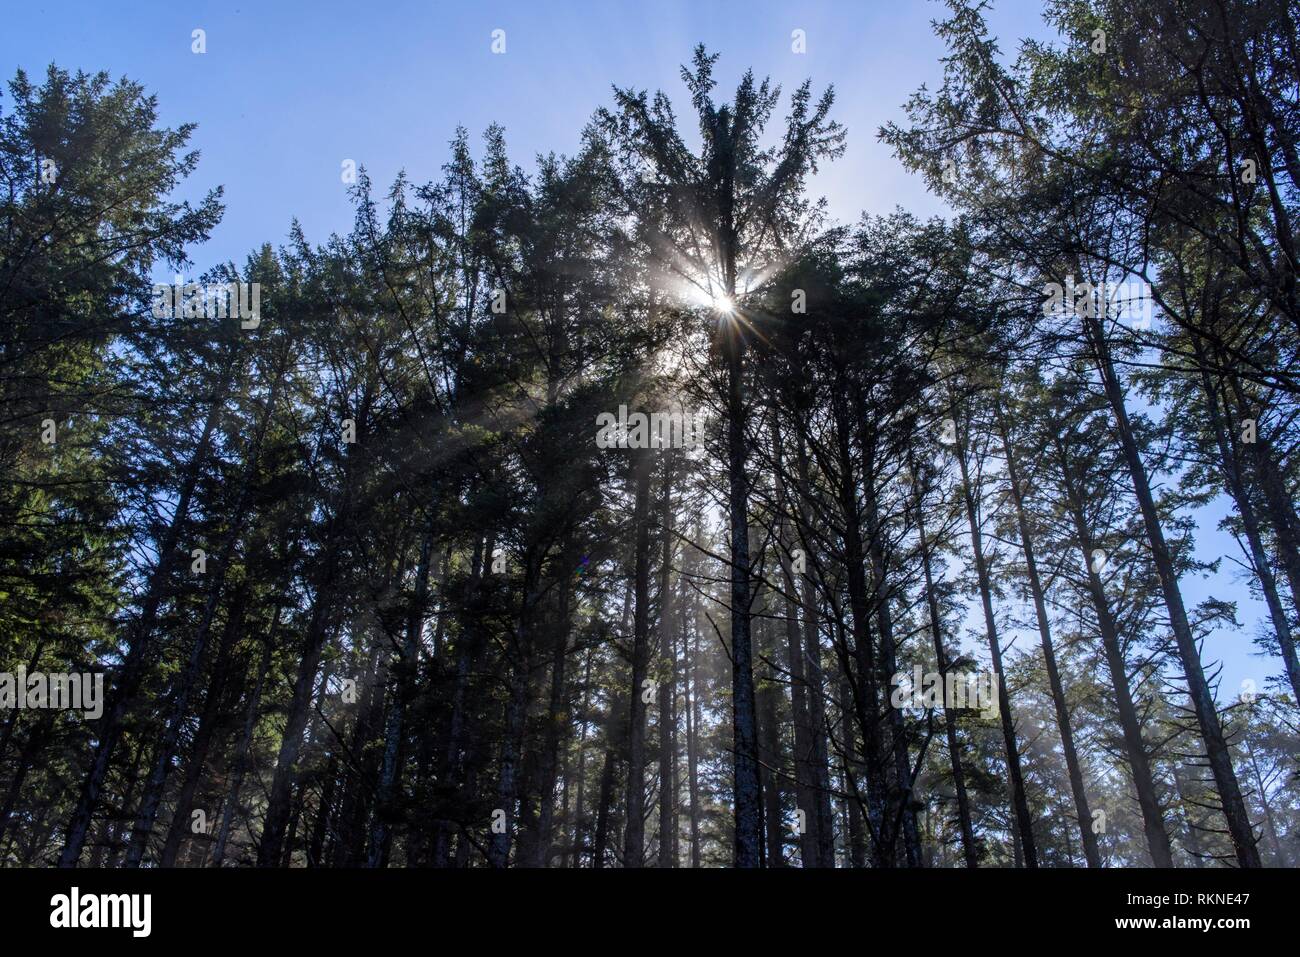 Tall trees in the mist, Cape Lookout State Park, Oregon, USA. Stock Photo